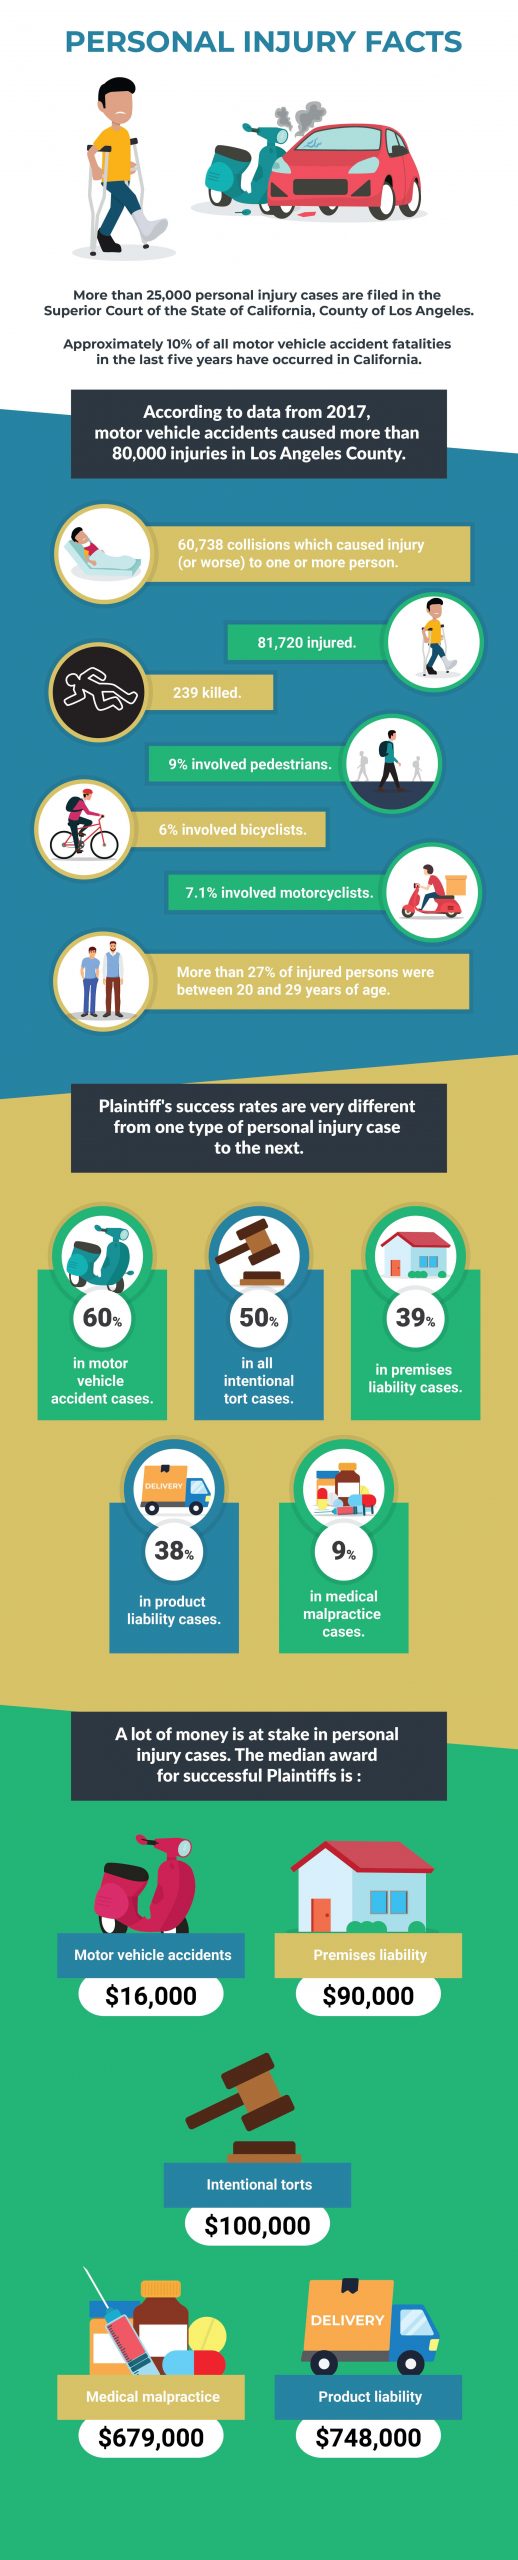 Los-Angeles-Personal-Injury-Facts-2020-infographic-plaza